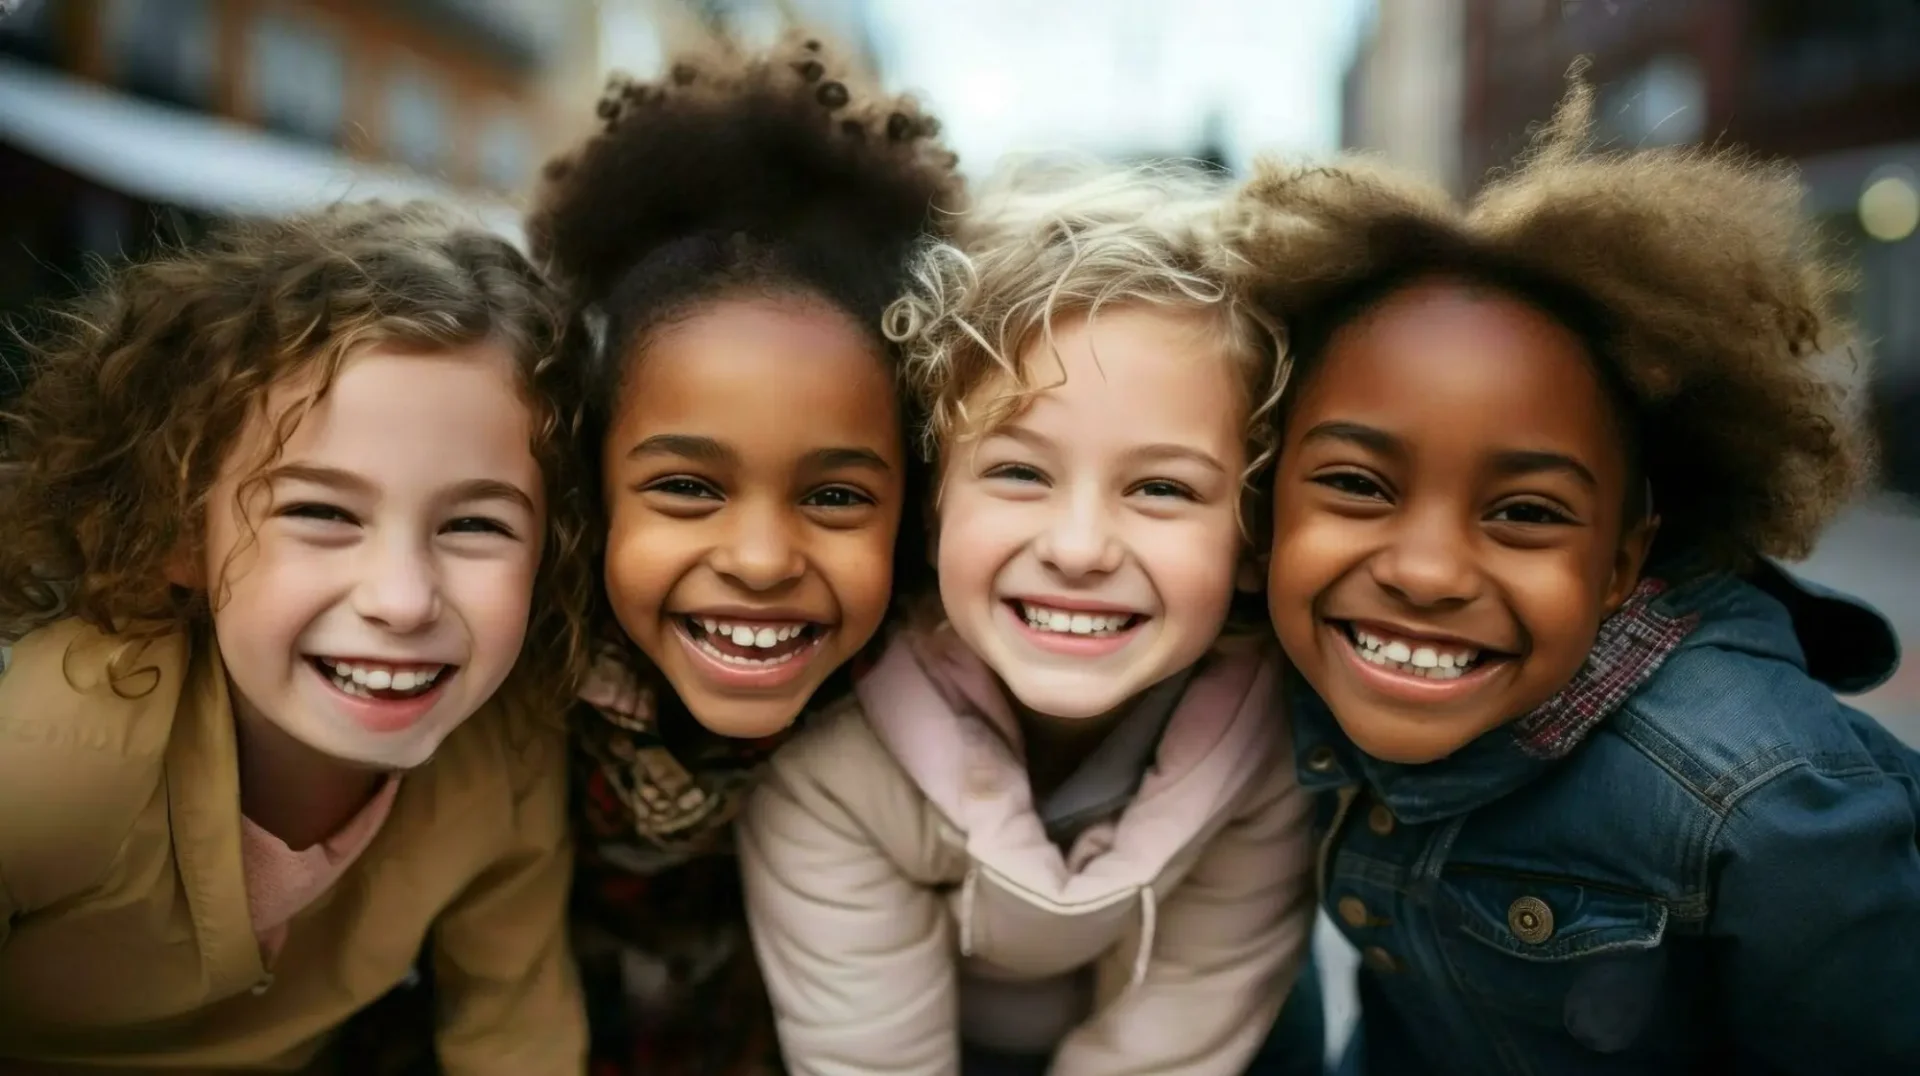 A group of children smiling for the camera.